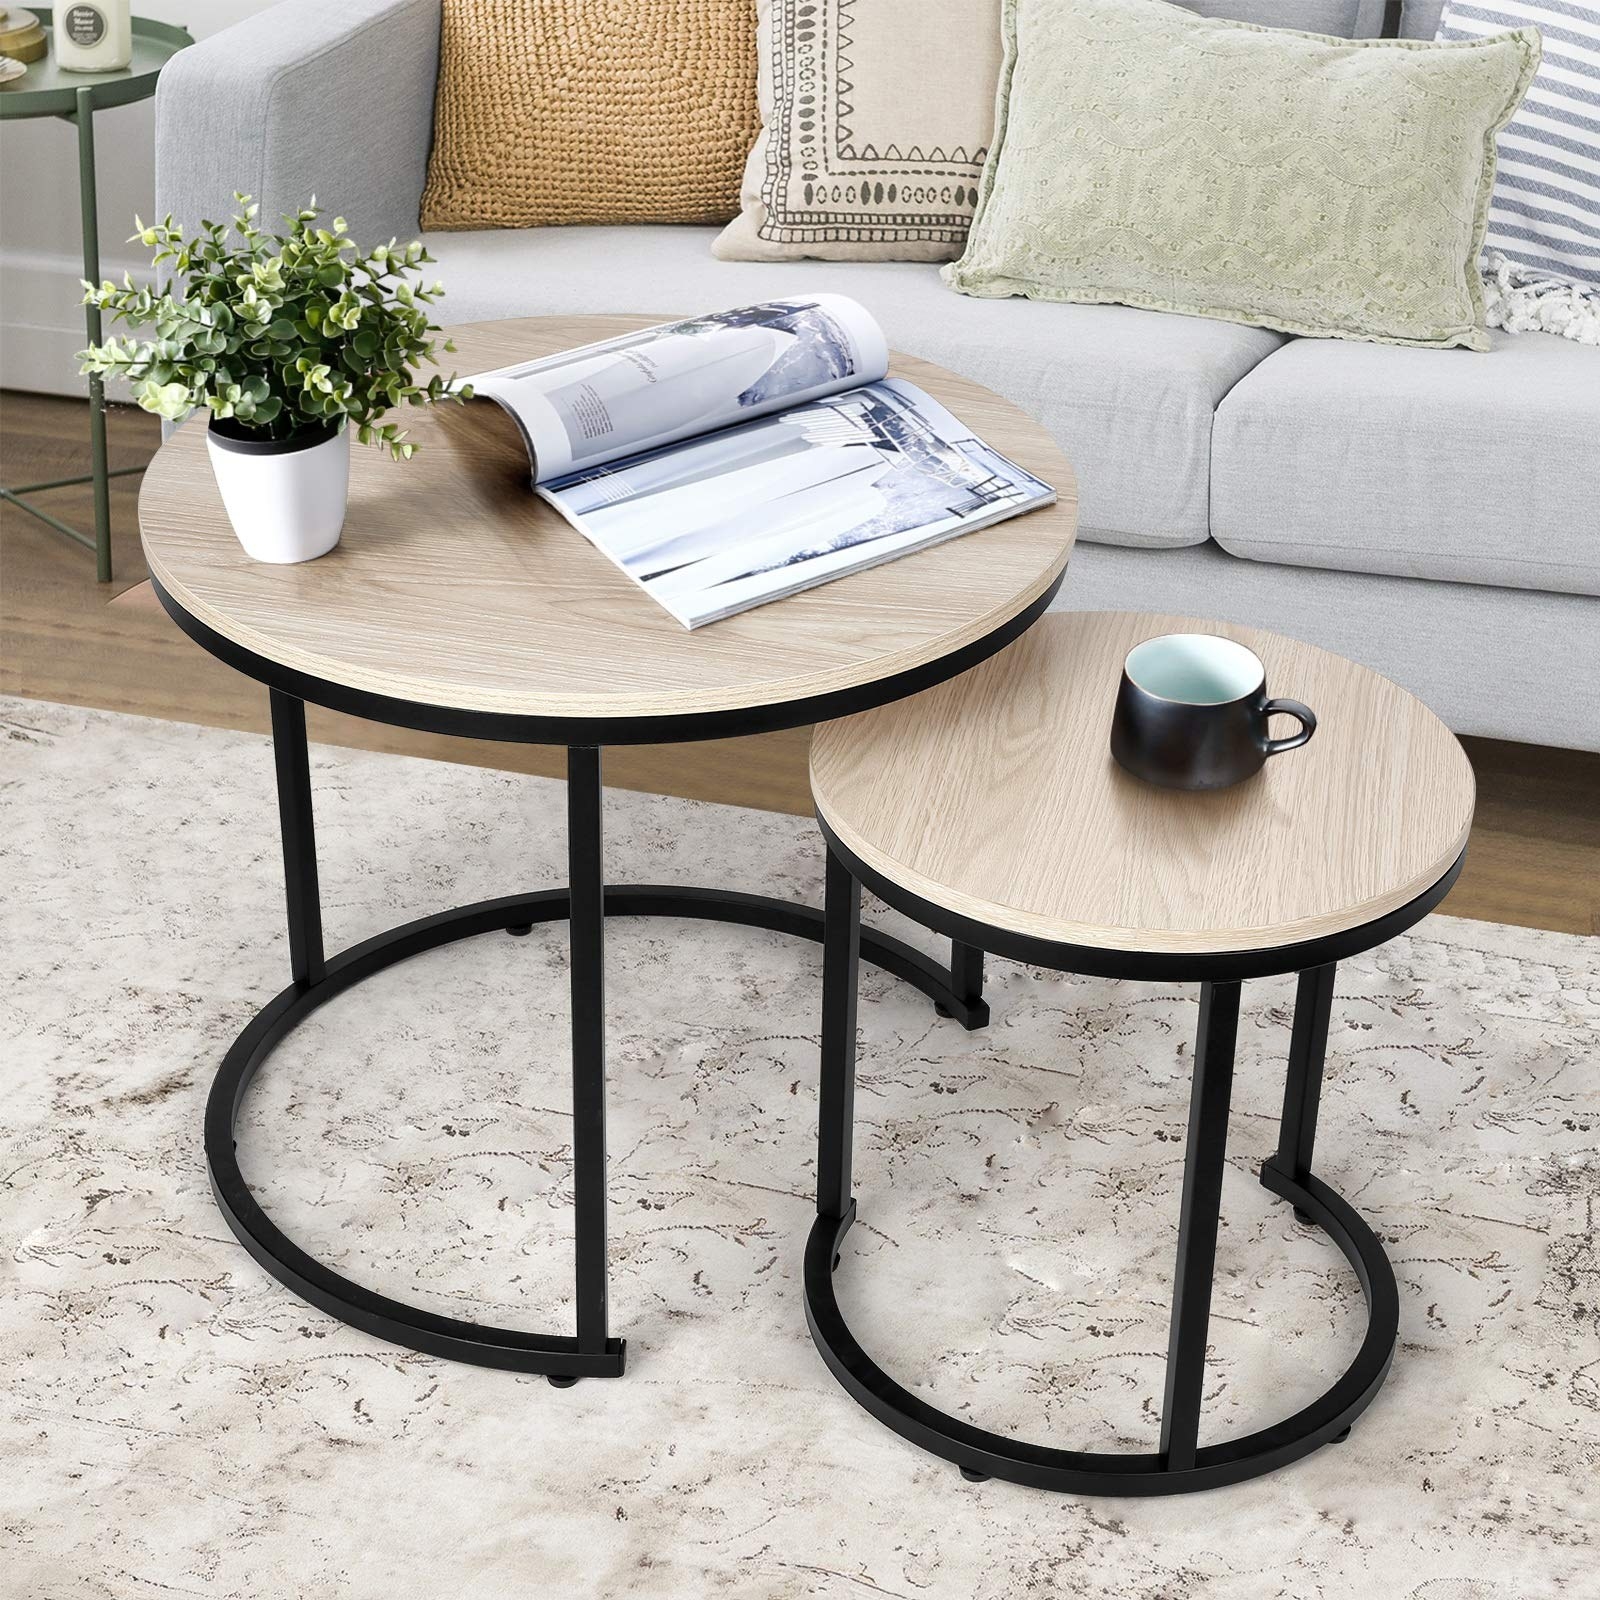 An image of a two-piece nesting table set in a natural finish